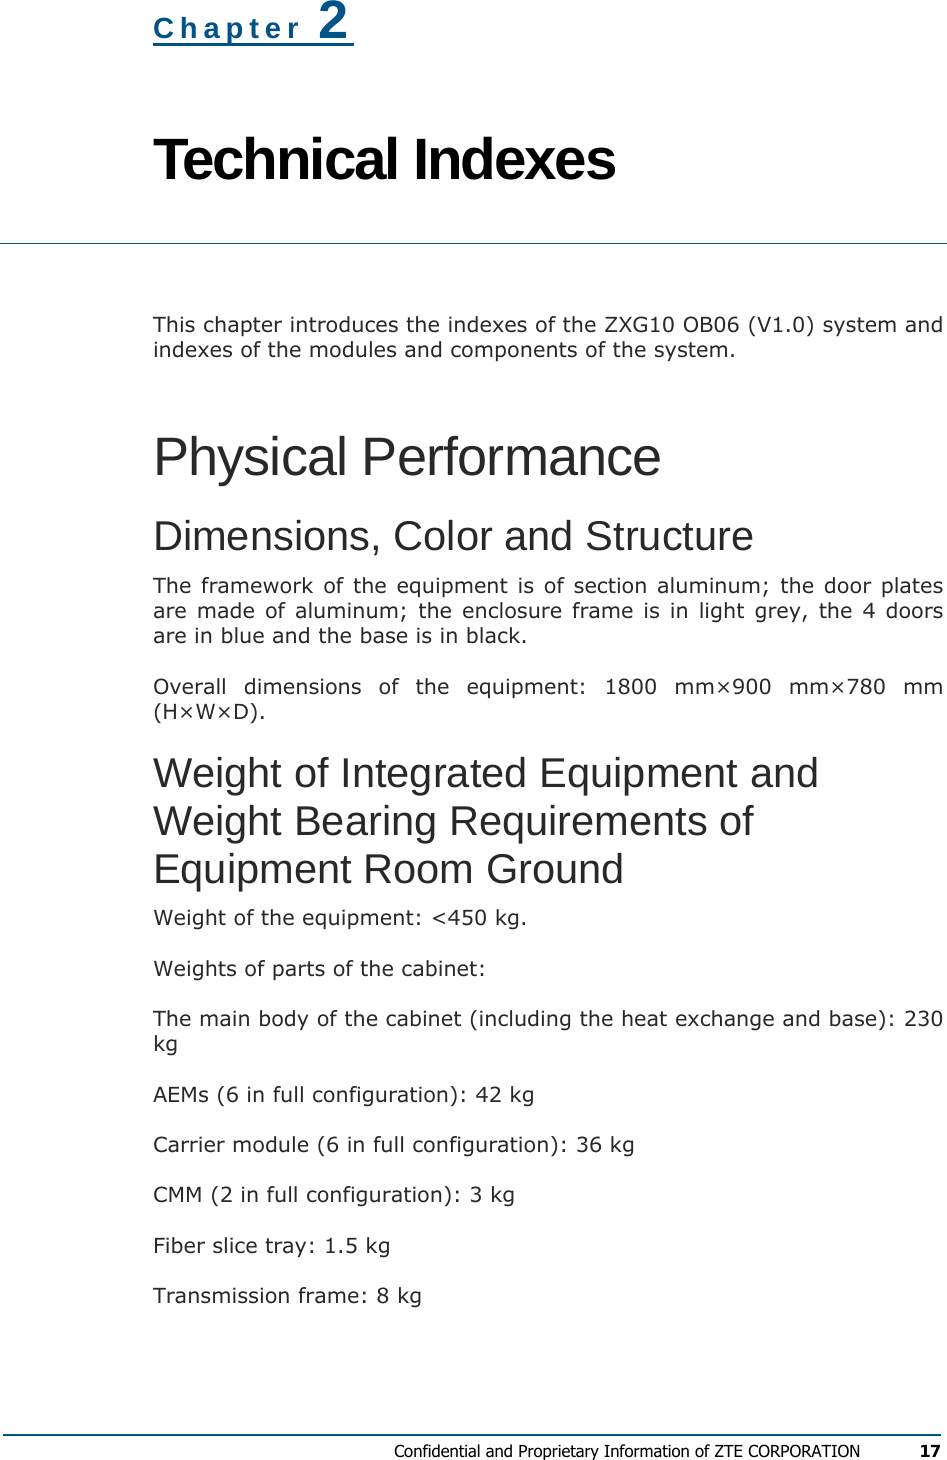  Confidential and Proprietary Information of ZTE CORPORATION 17 Chapter 2 Technical Indexes  This chapter introduces the indexes of the ZXG10 OB06 (V1.0) system and indexes of the modules and components of the system. Physical Performance Dimensions, Color and Structure The framework of the equipment is of section aluminum; the door plates are made of aluminum; the enclosure frame is in light grey, the 4 doors are in blue and the base is in black. Overall dimensions of the equipment: 1800 mm×900 mm×780 mm (H×W×D). Weight of Integrated Equipment and Weight Bearing Requirements of Equipment Room Ground Weight of the equipment: &lt;450 kg. Weights of parts of the cabinet:  The main body of the cabinet (including the heat exchange and base): 230 kg AEMs (6 in full configuration): 42 kg Carrier module (6 in full configuration): 36 kg CMM (2 in full configuration): 3 kg Fiber slice tray: 1.5 kg Transmission frame: 8 kg 